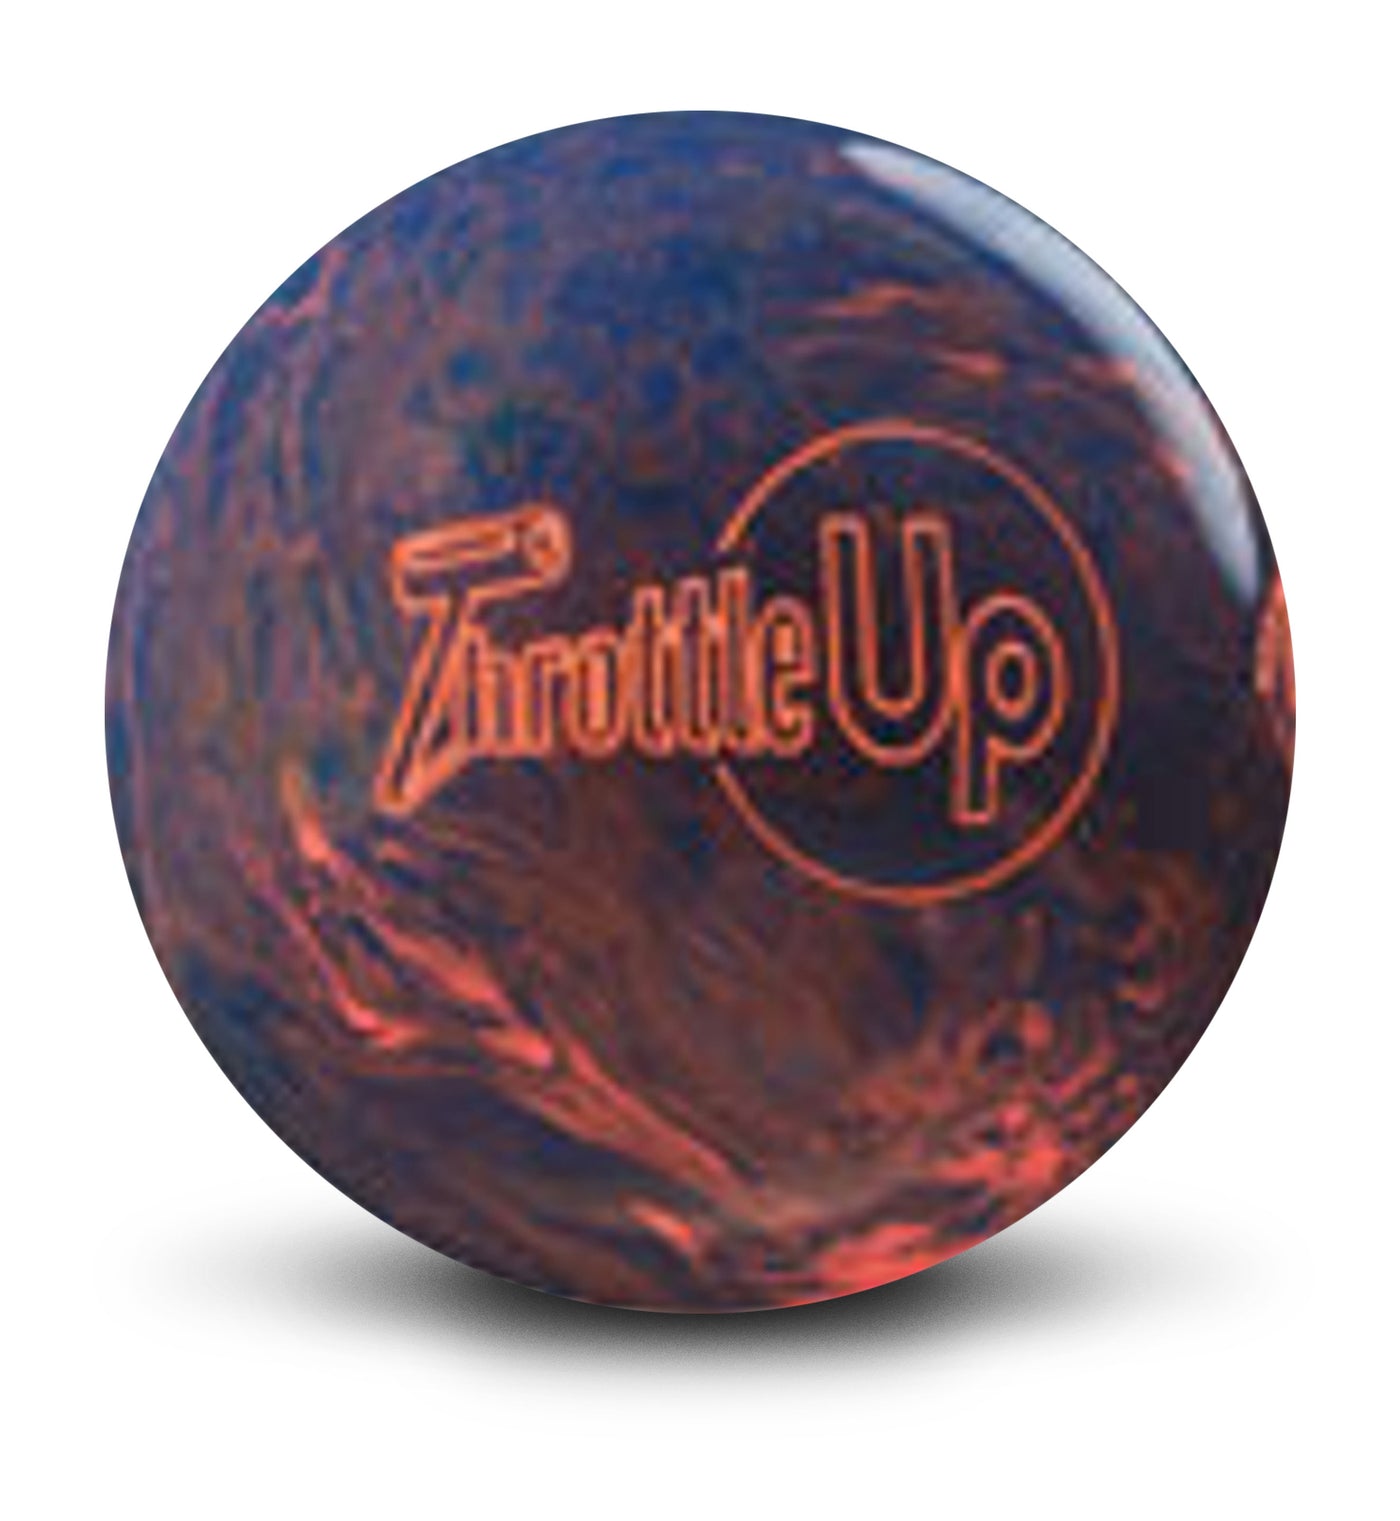 Throttle Up Bowling Ball